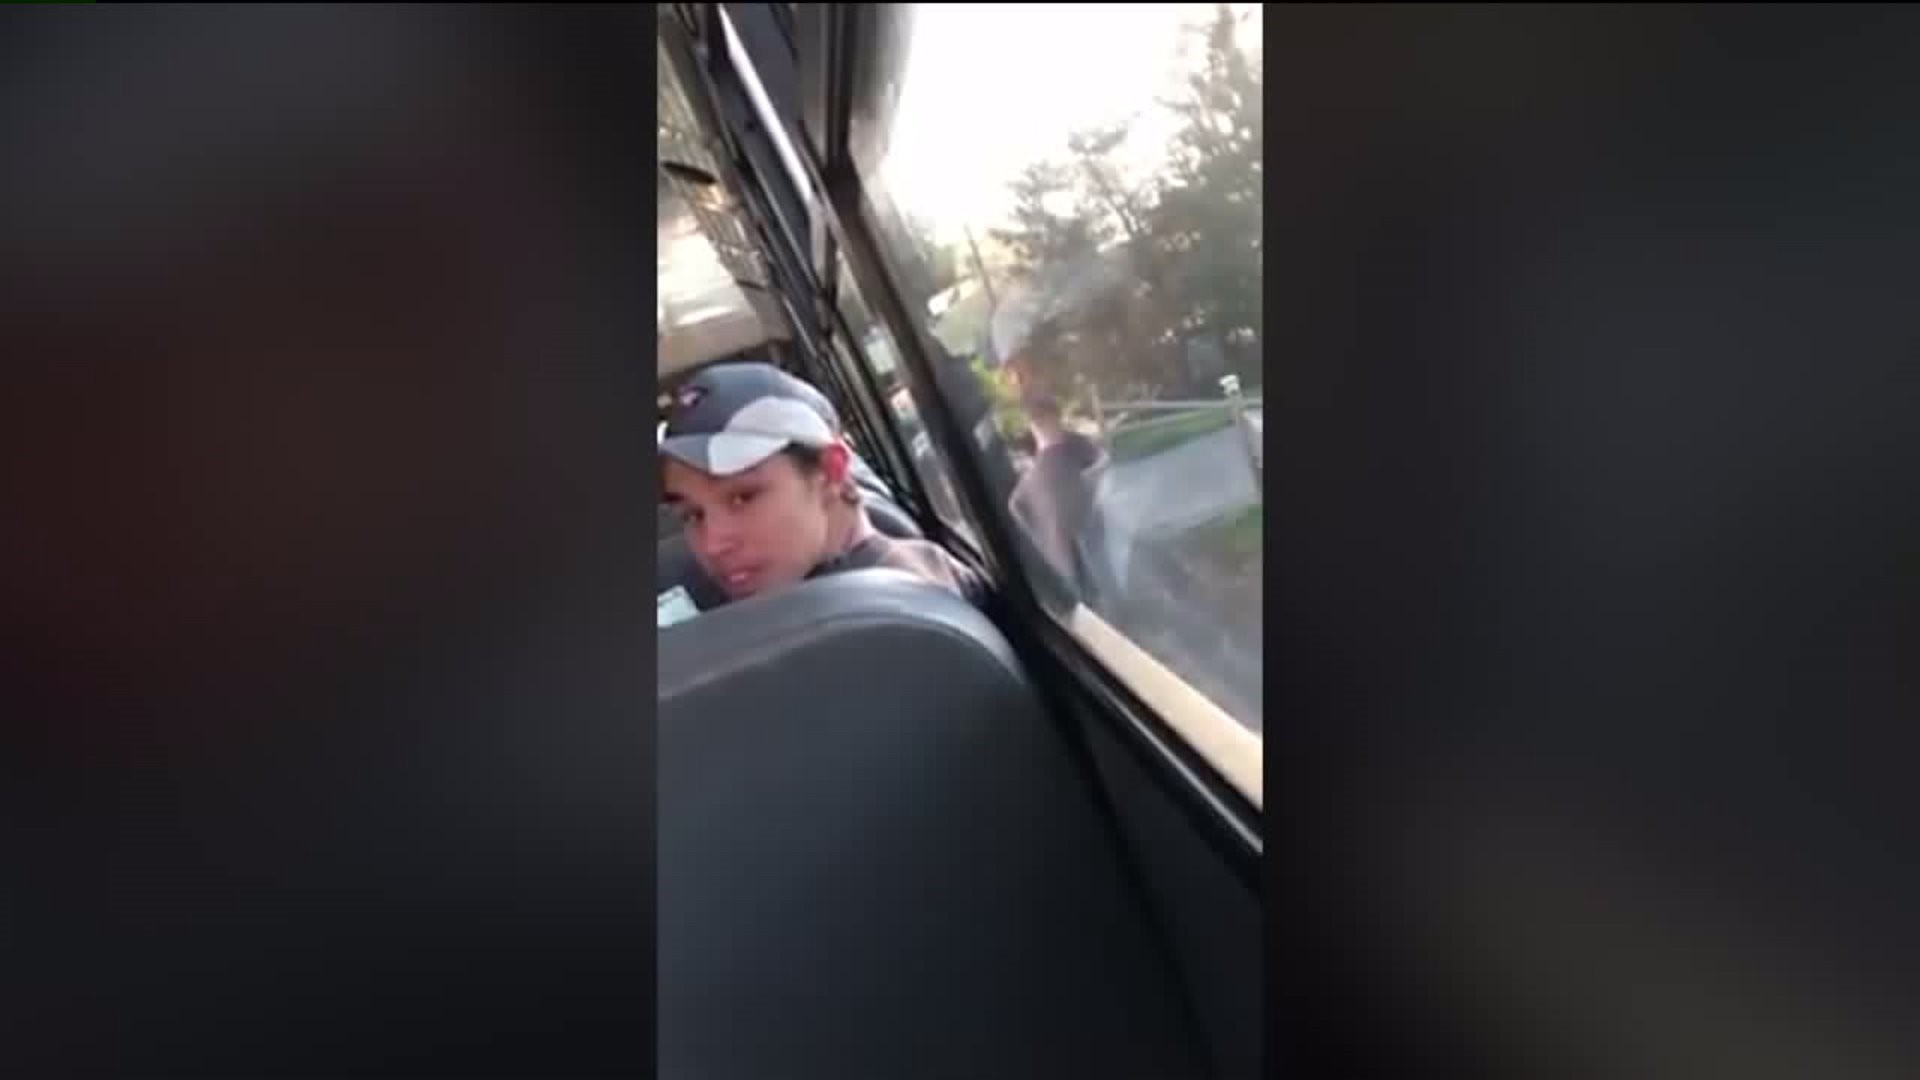 School Bus Driver Caught on Camera Yelling, Swearing at Student She Refuses to Let on Bus